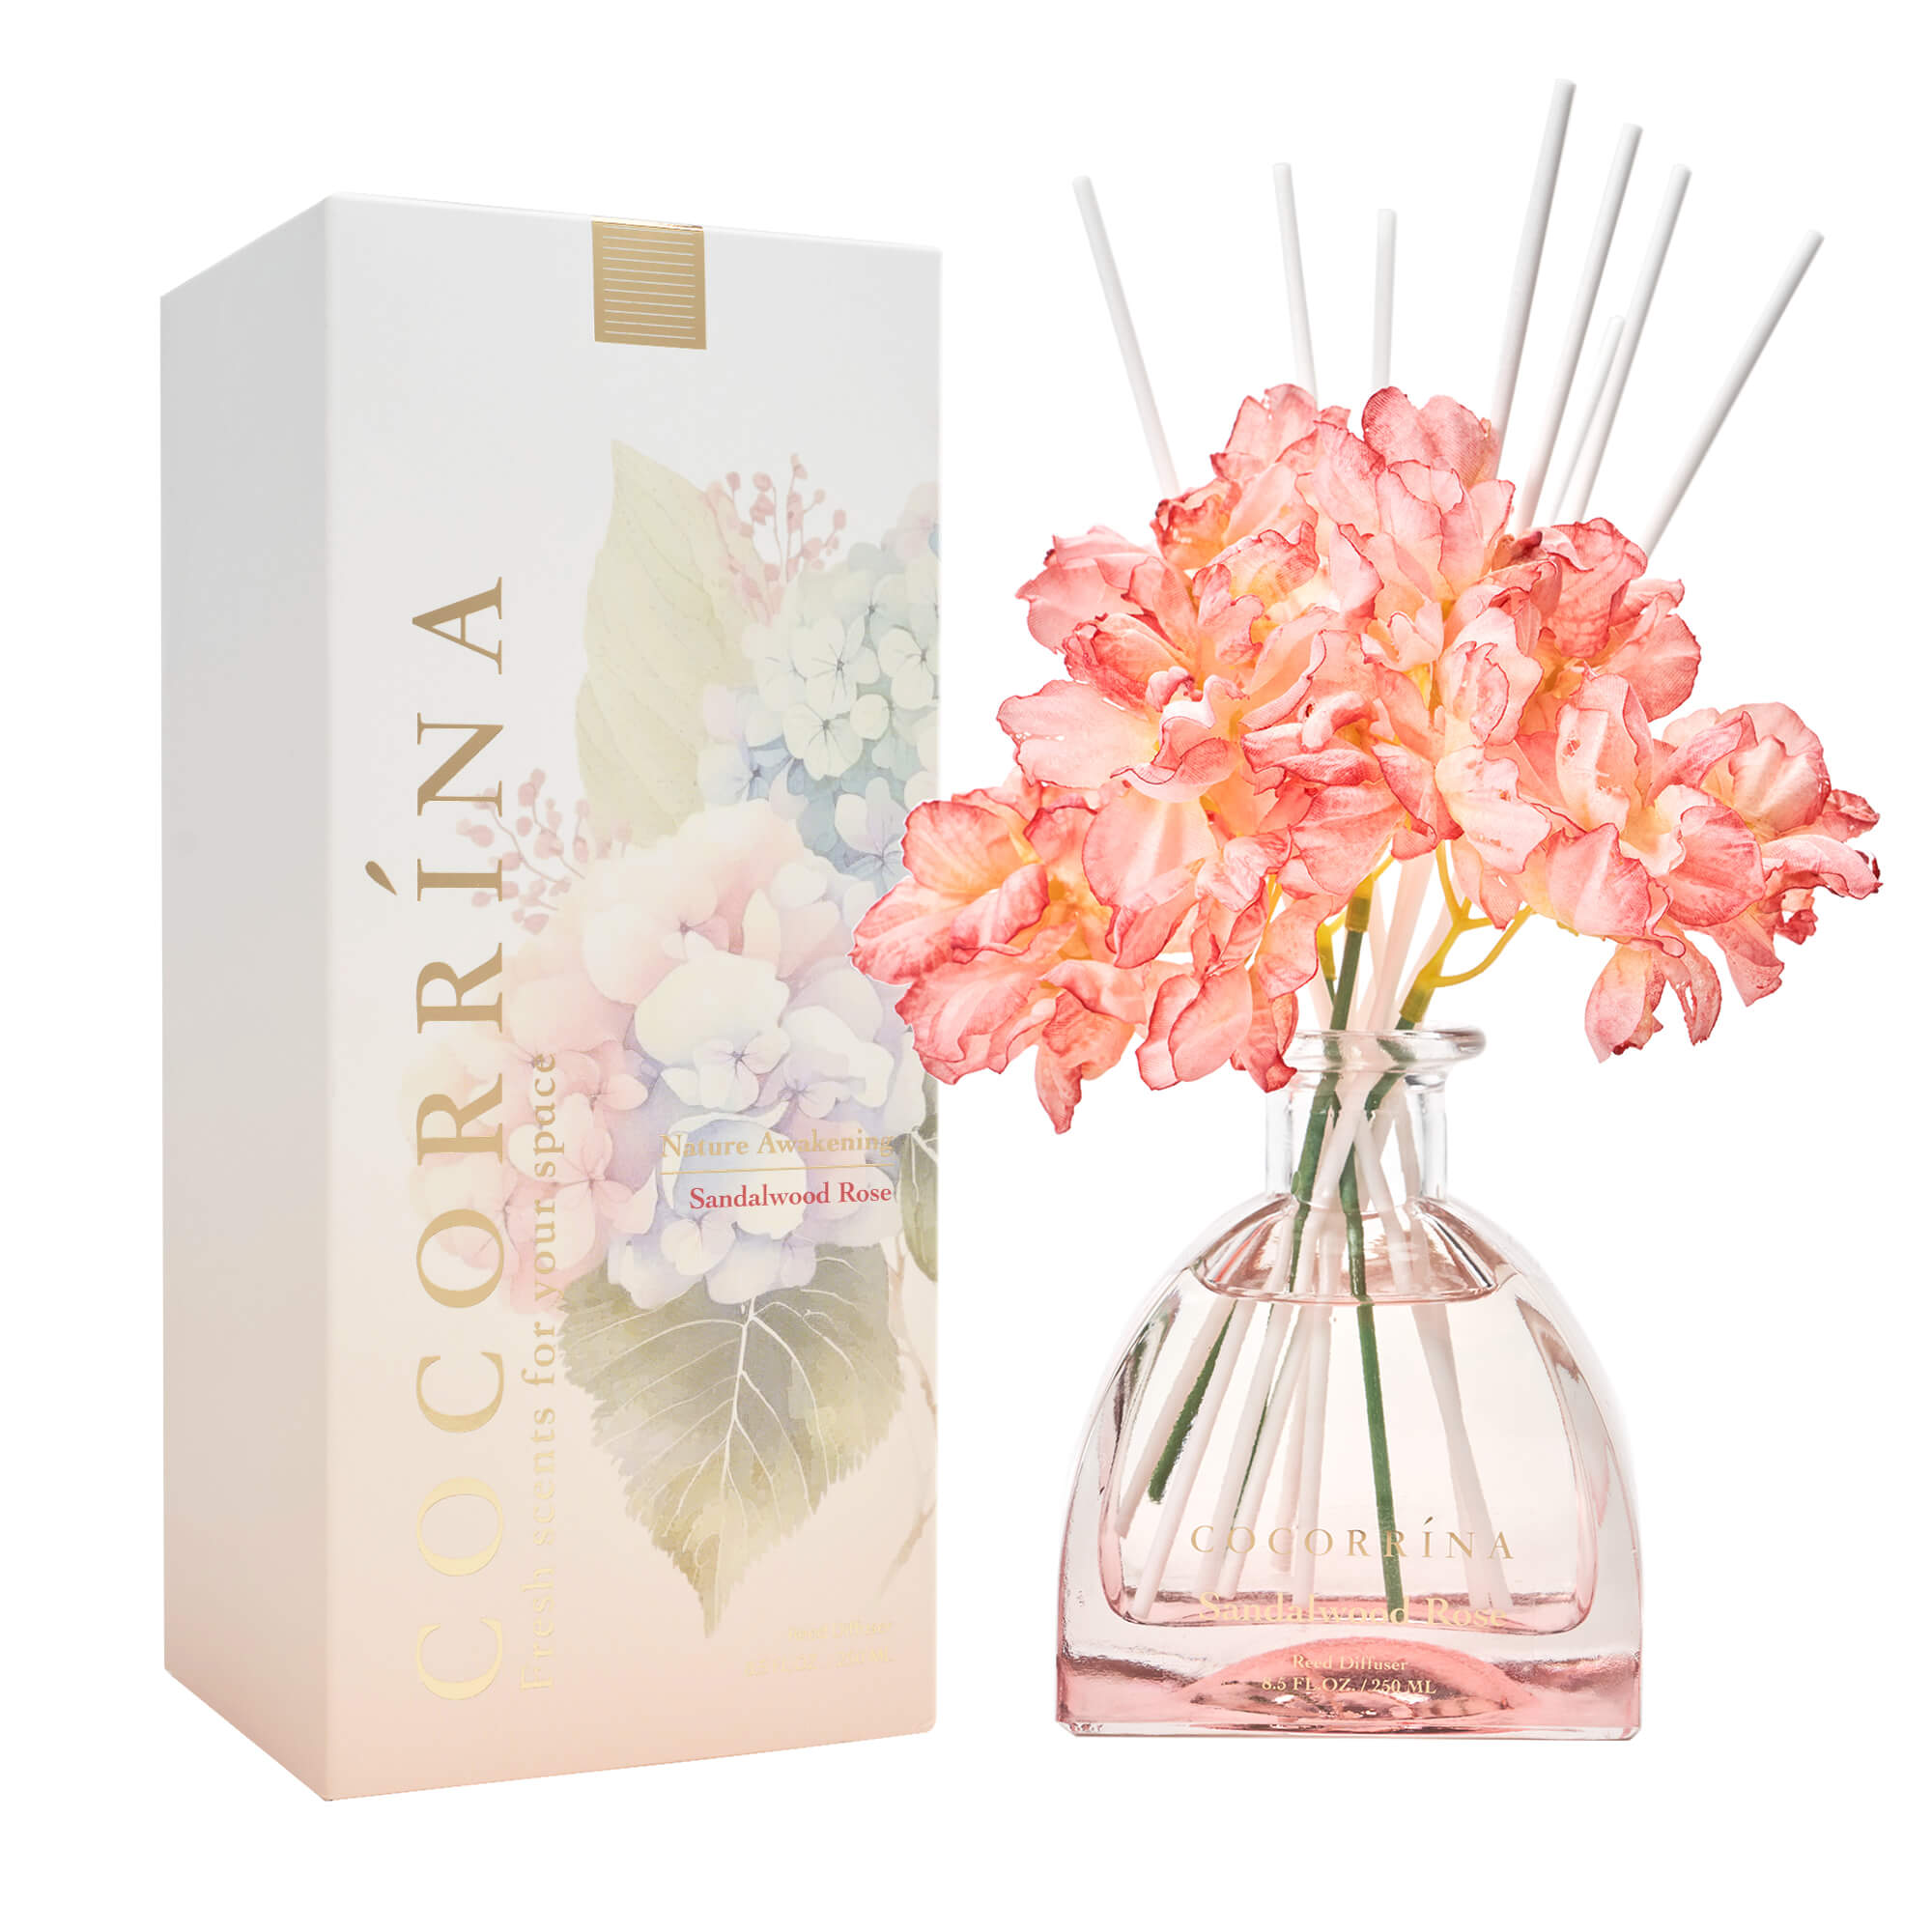 COCORRÍNA Sandalwood Rose Simple Luxe Reed Diffuser